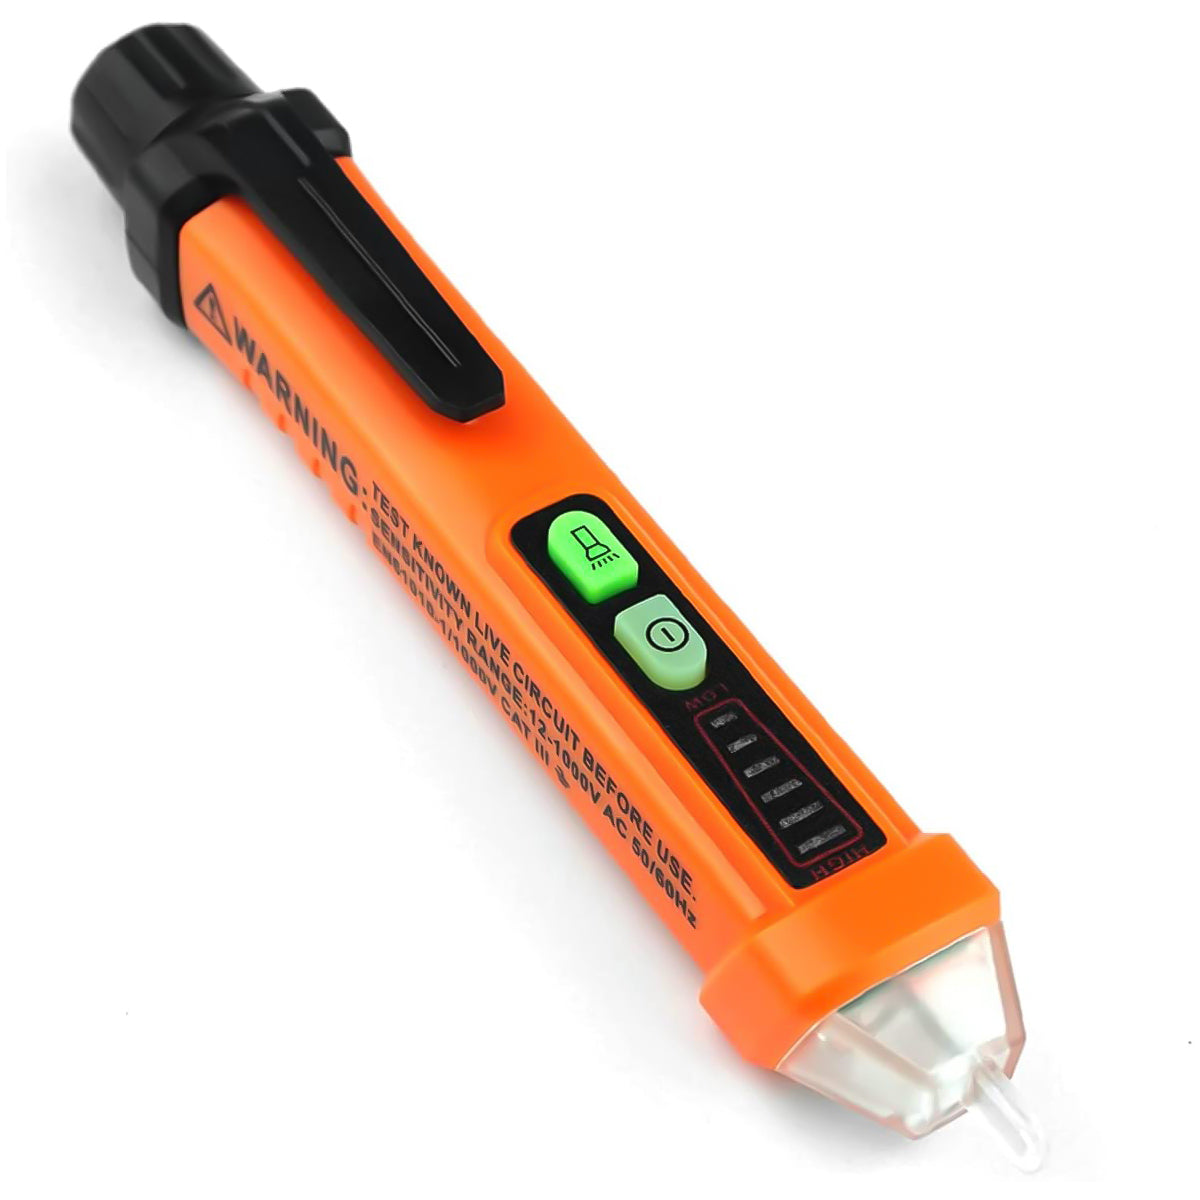 Elcart Non-contact AC voltage detector, phase finding pen with LED, tool for checking the presence of voltage, electric current tester